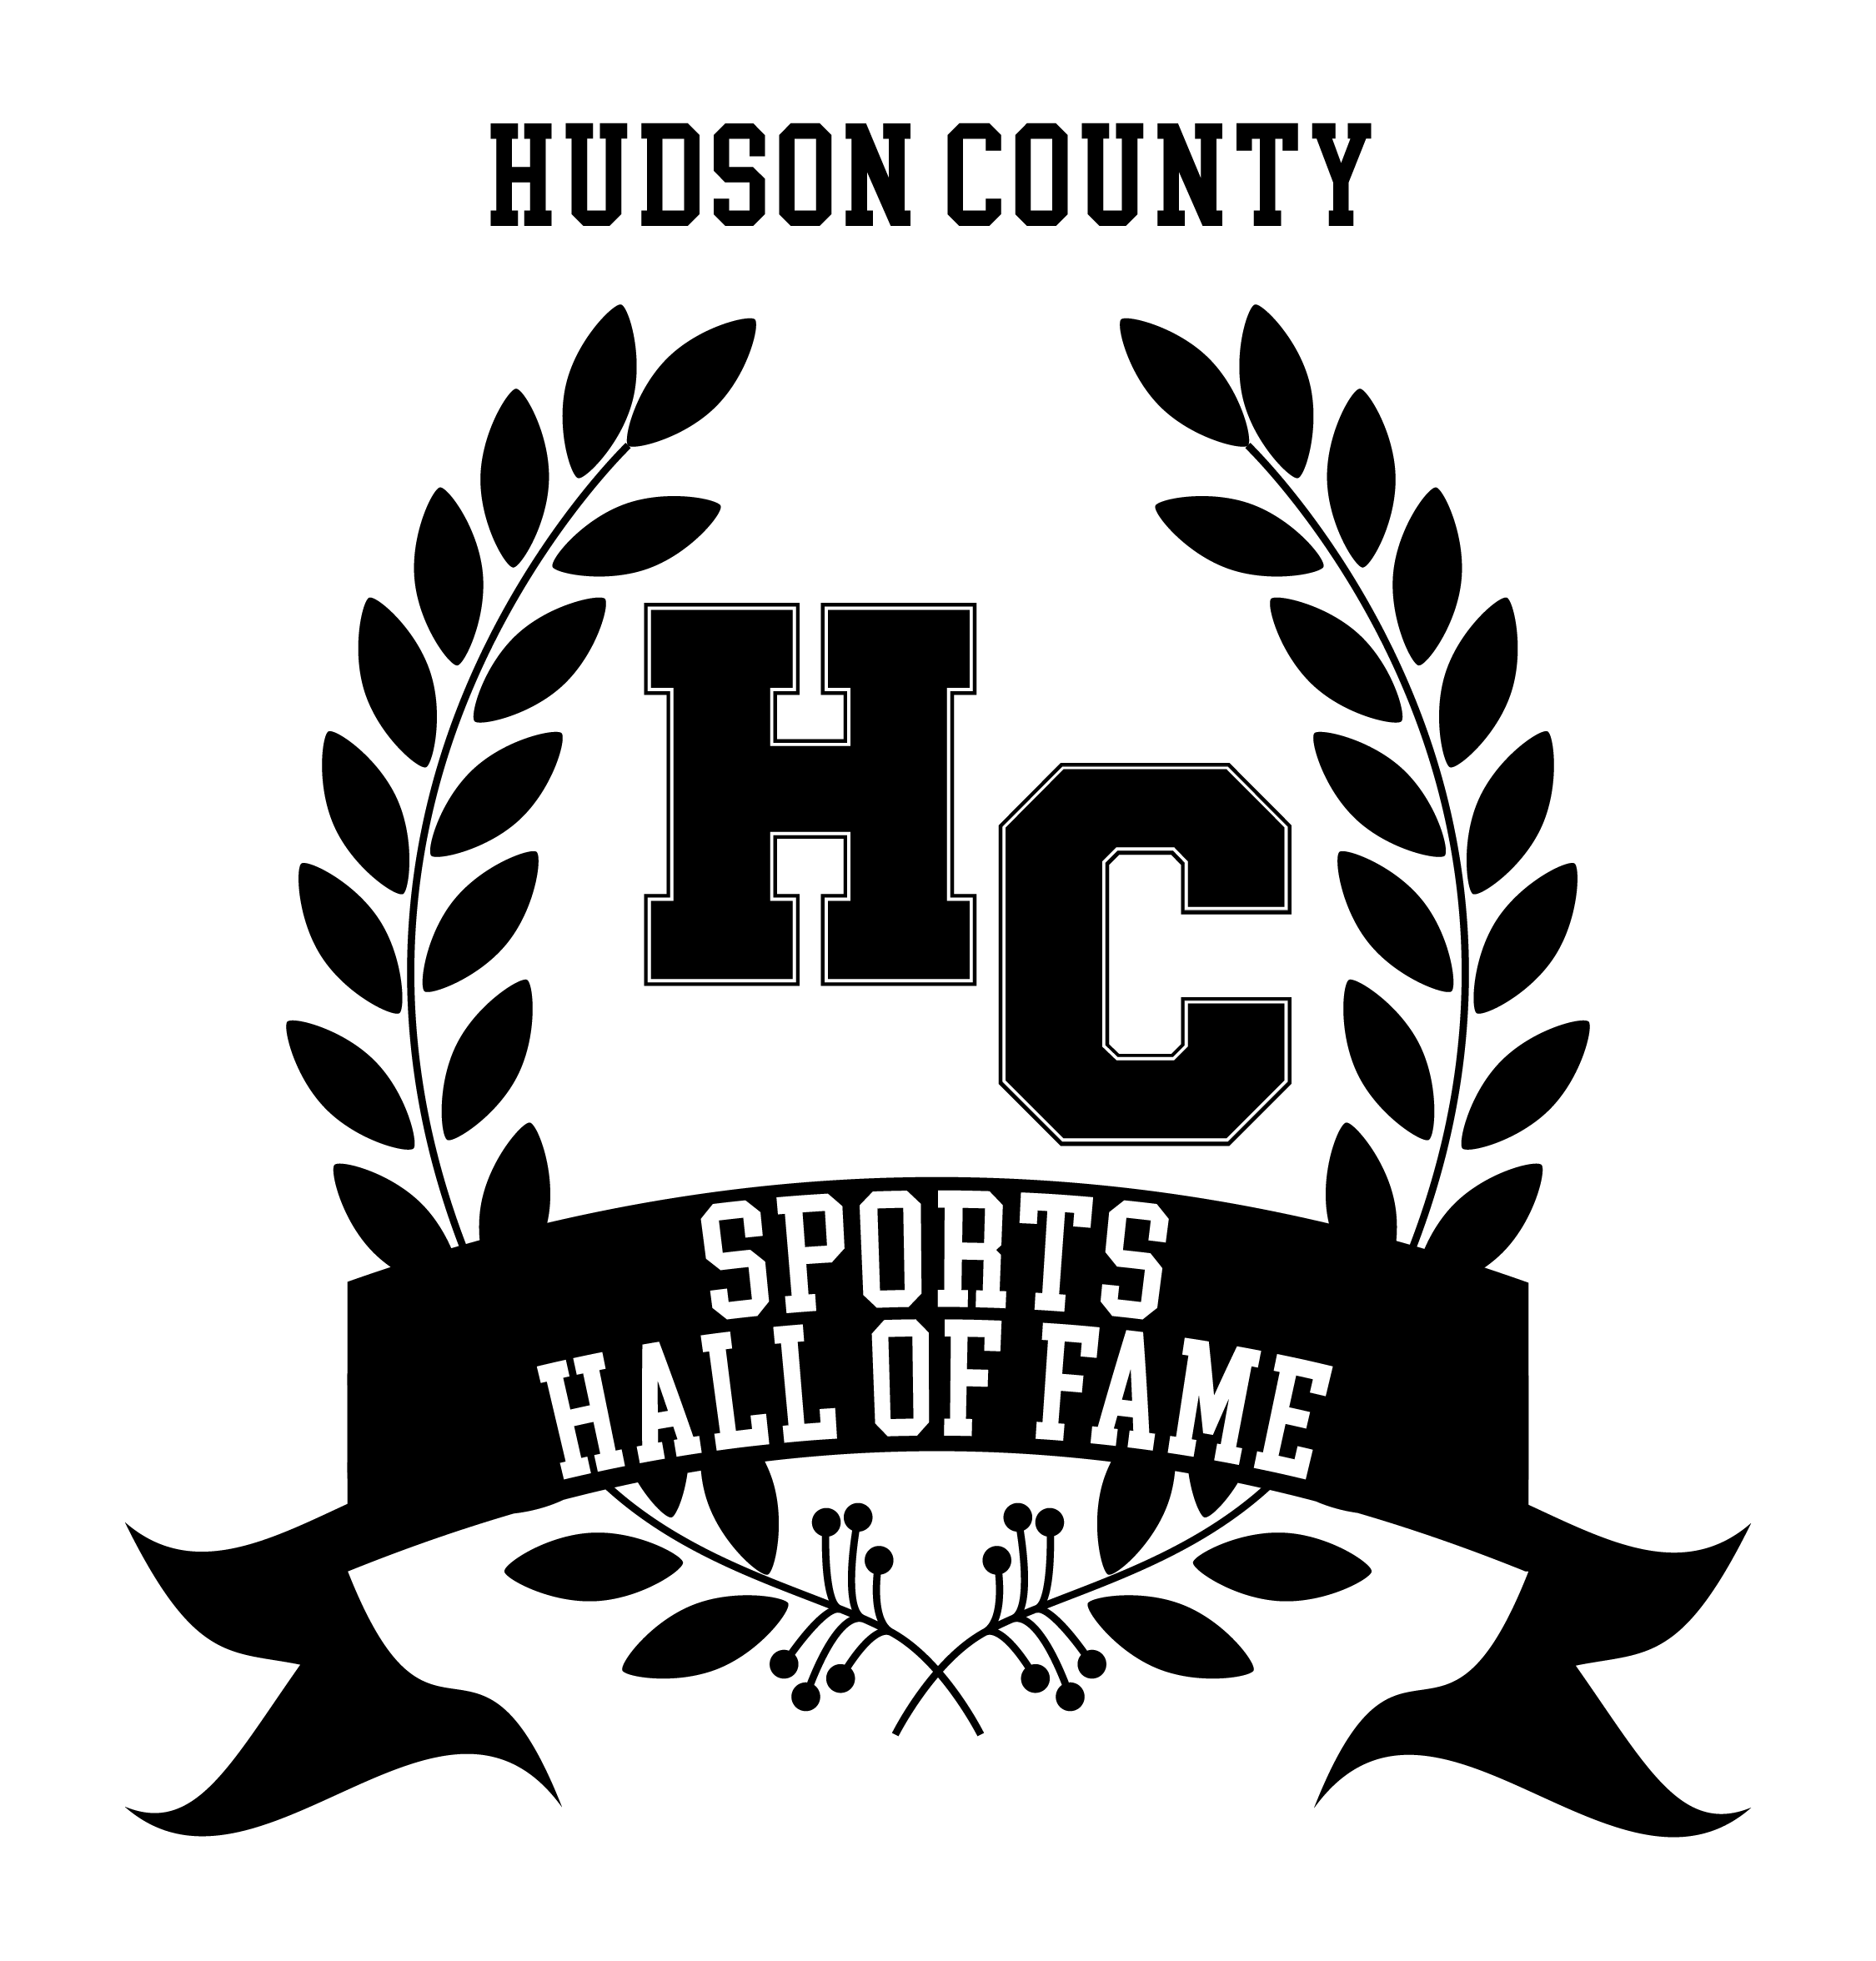 Hudson County Sports Hall of Fame